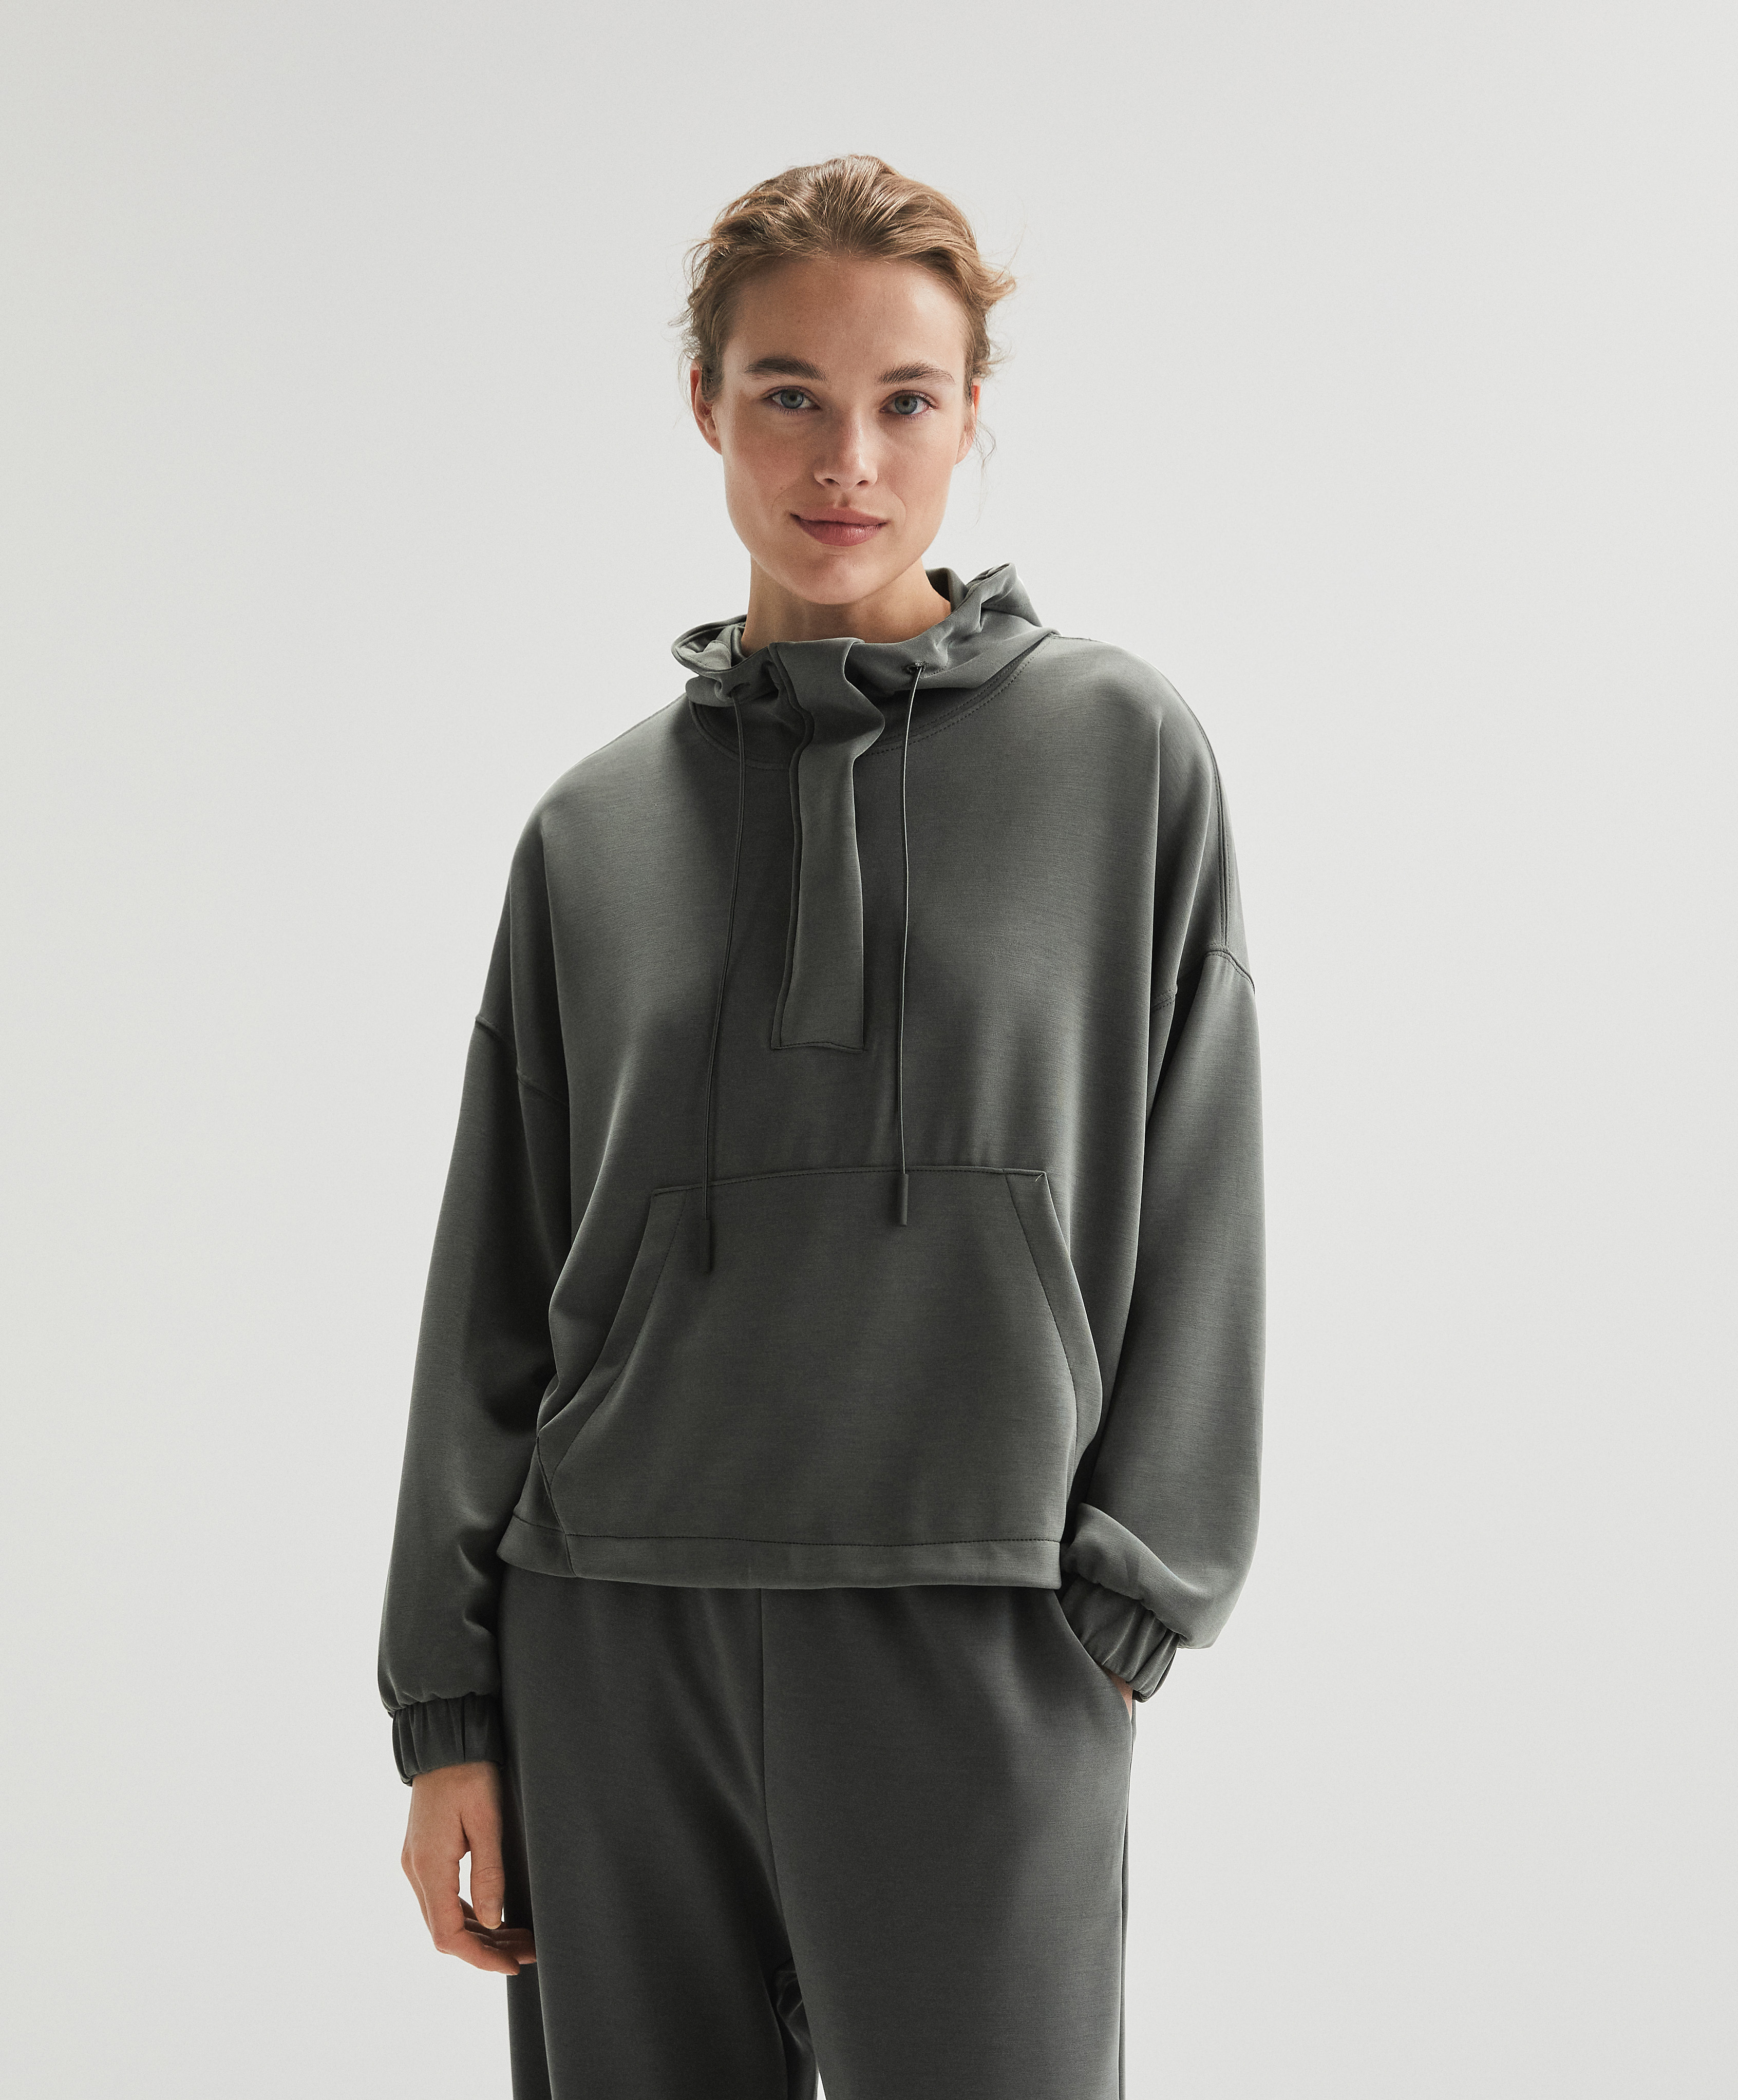 Soft touch modal sweatshirt with zip